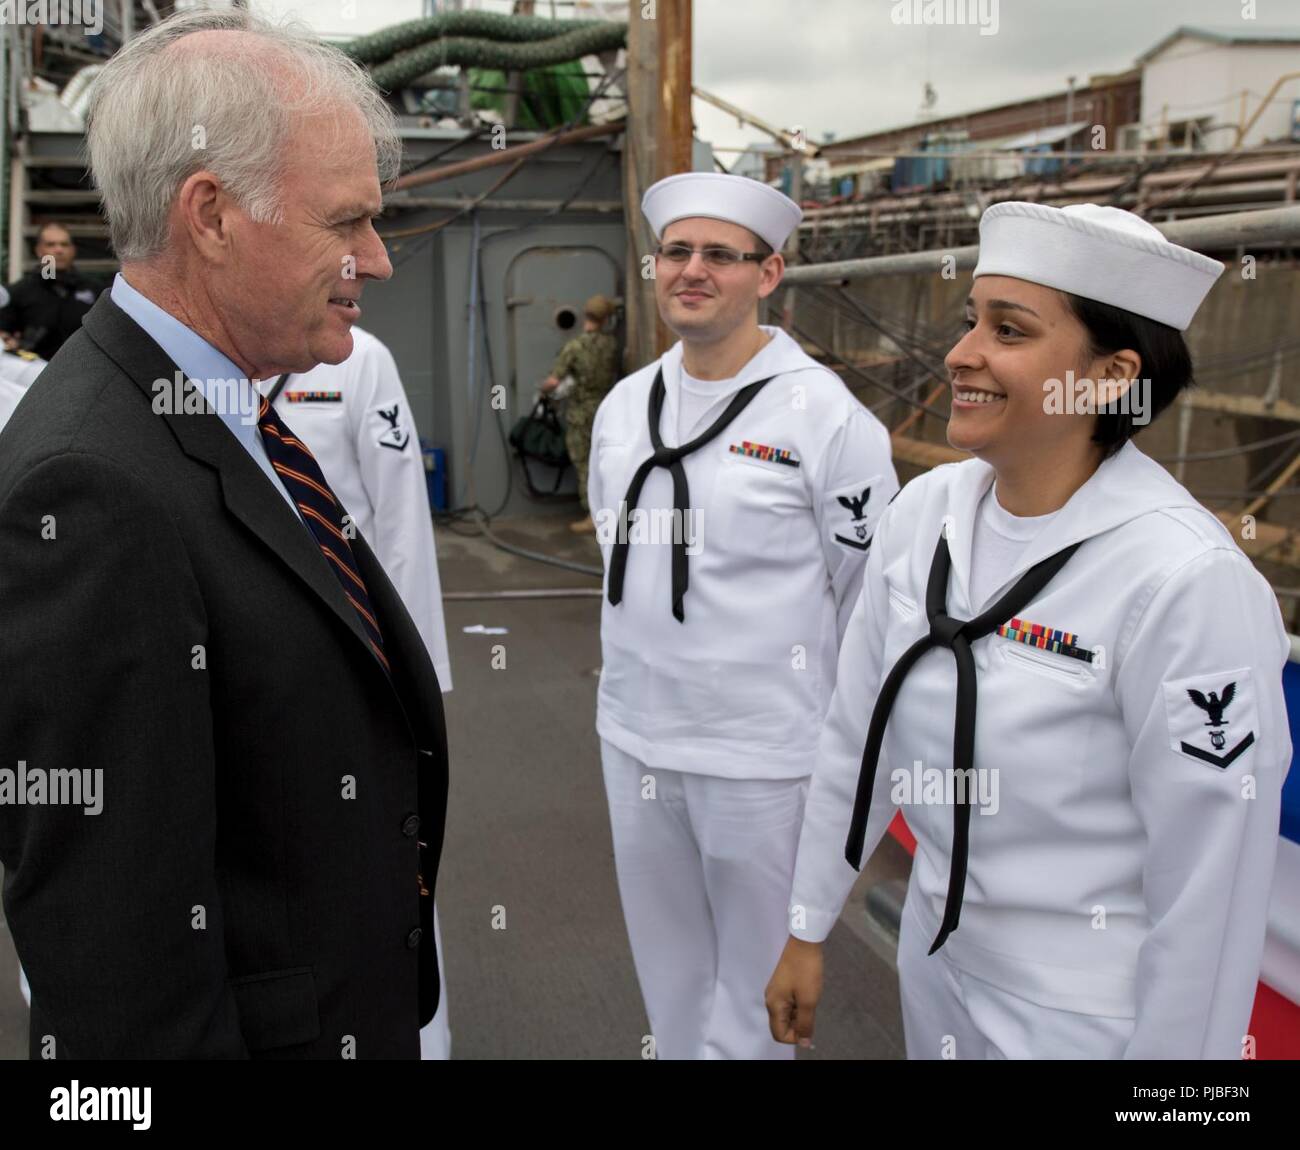 Secretary of the Navy Richard V. Spencer speaks with Musician 3rd Class T'anna Tercero, assigned to the U.S. Seventh Fleet Band, following a ceremony aboard the guided-missile destroyer USS John S. McCain (DDG 56) to induct U.S. Sen. John S. McCain III into the ship's official namesake July 12, 2018. Expanding the namesake to include Senator McCain honors his family's three generations of dedicated service to the U.S. Navy. Stock Photo